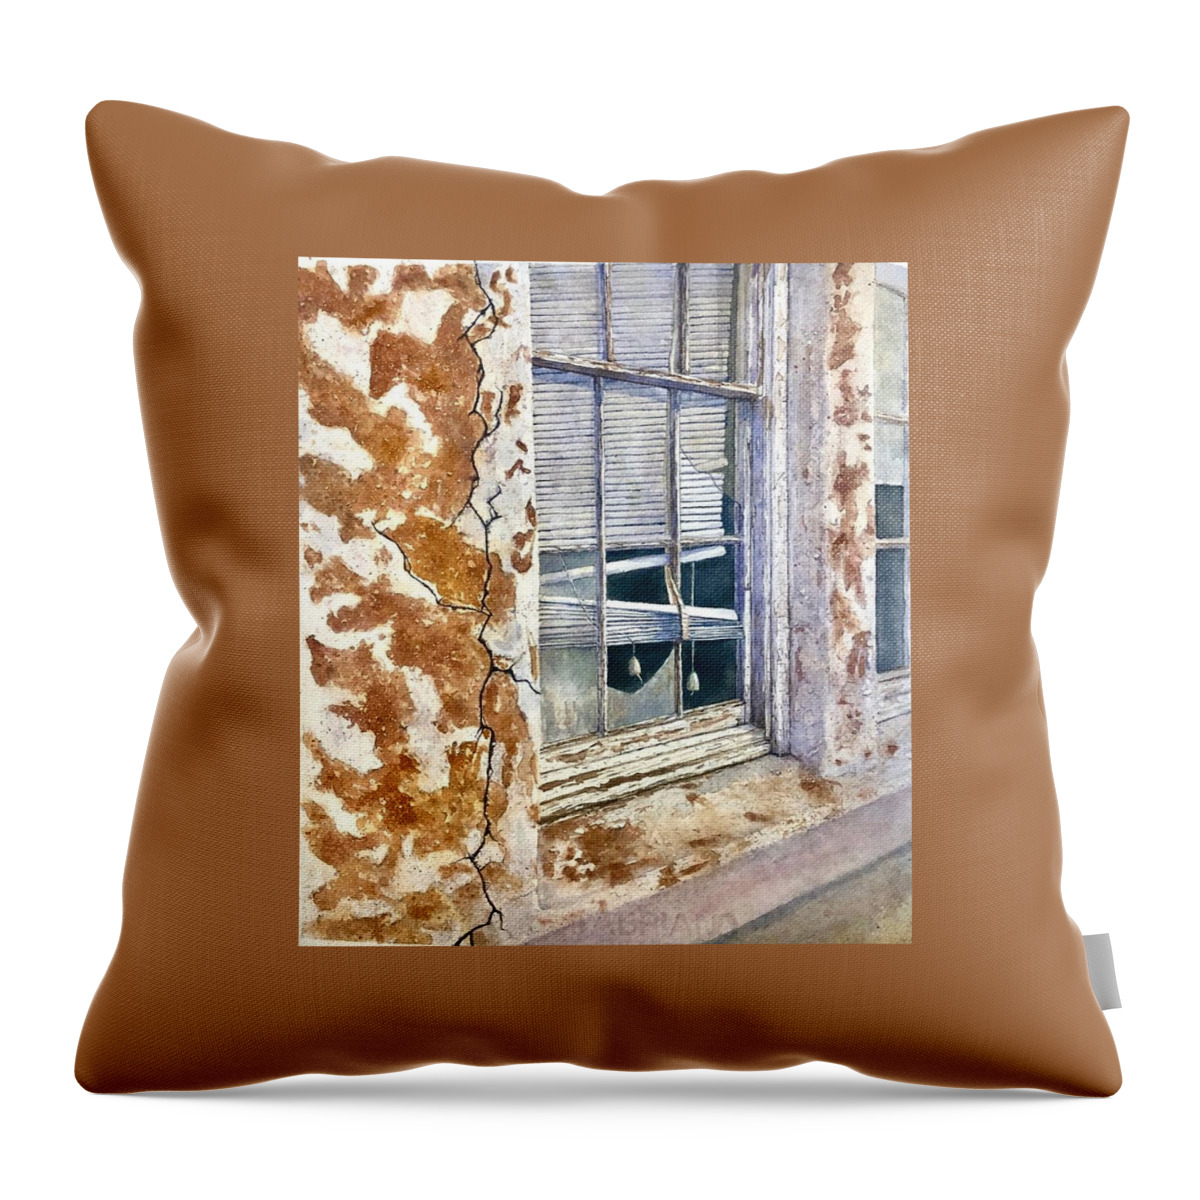 Structural Throw Pillow featuring the painting In Search Of Love by John Glass